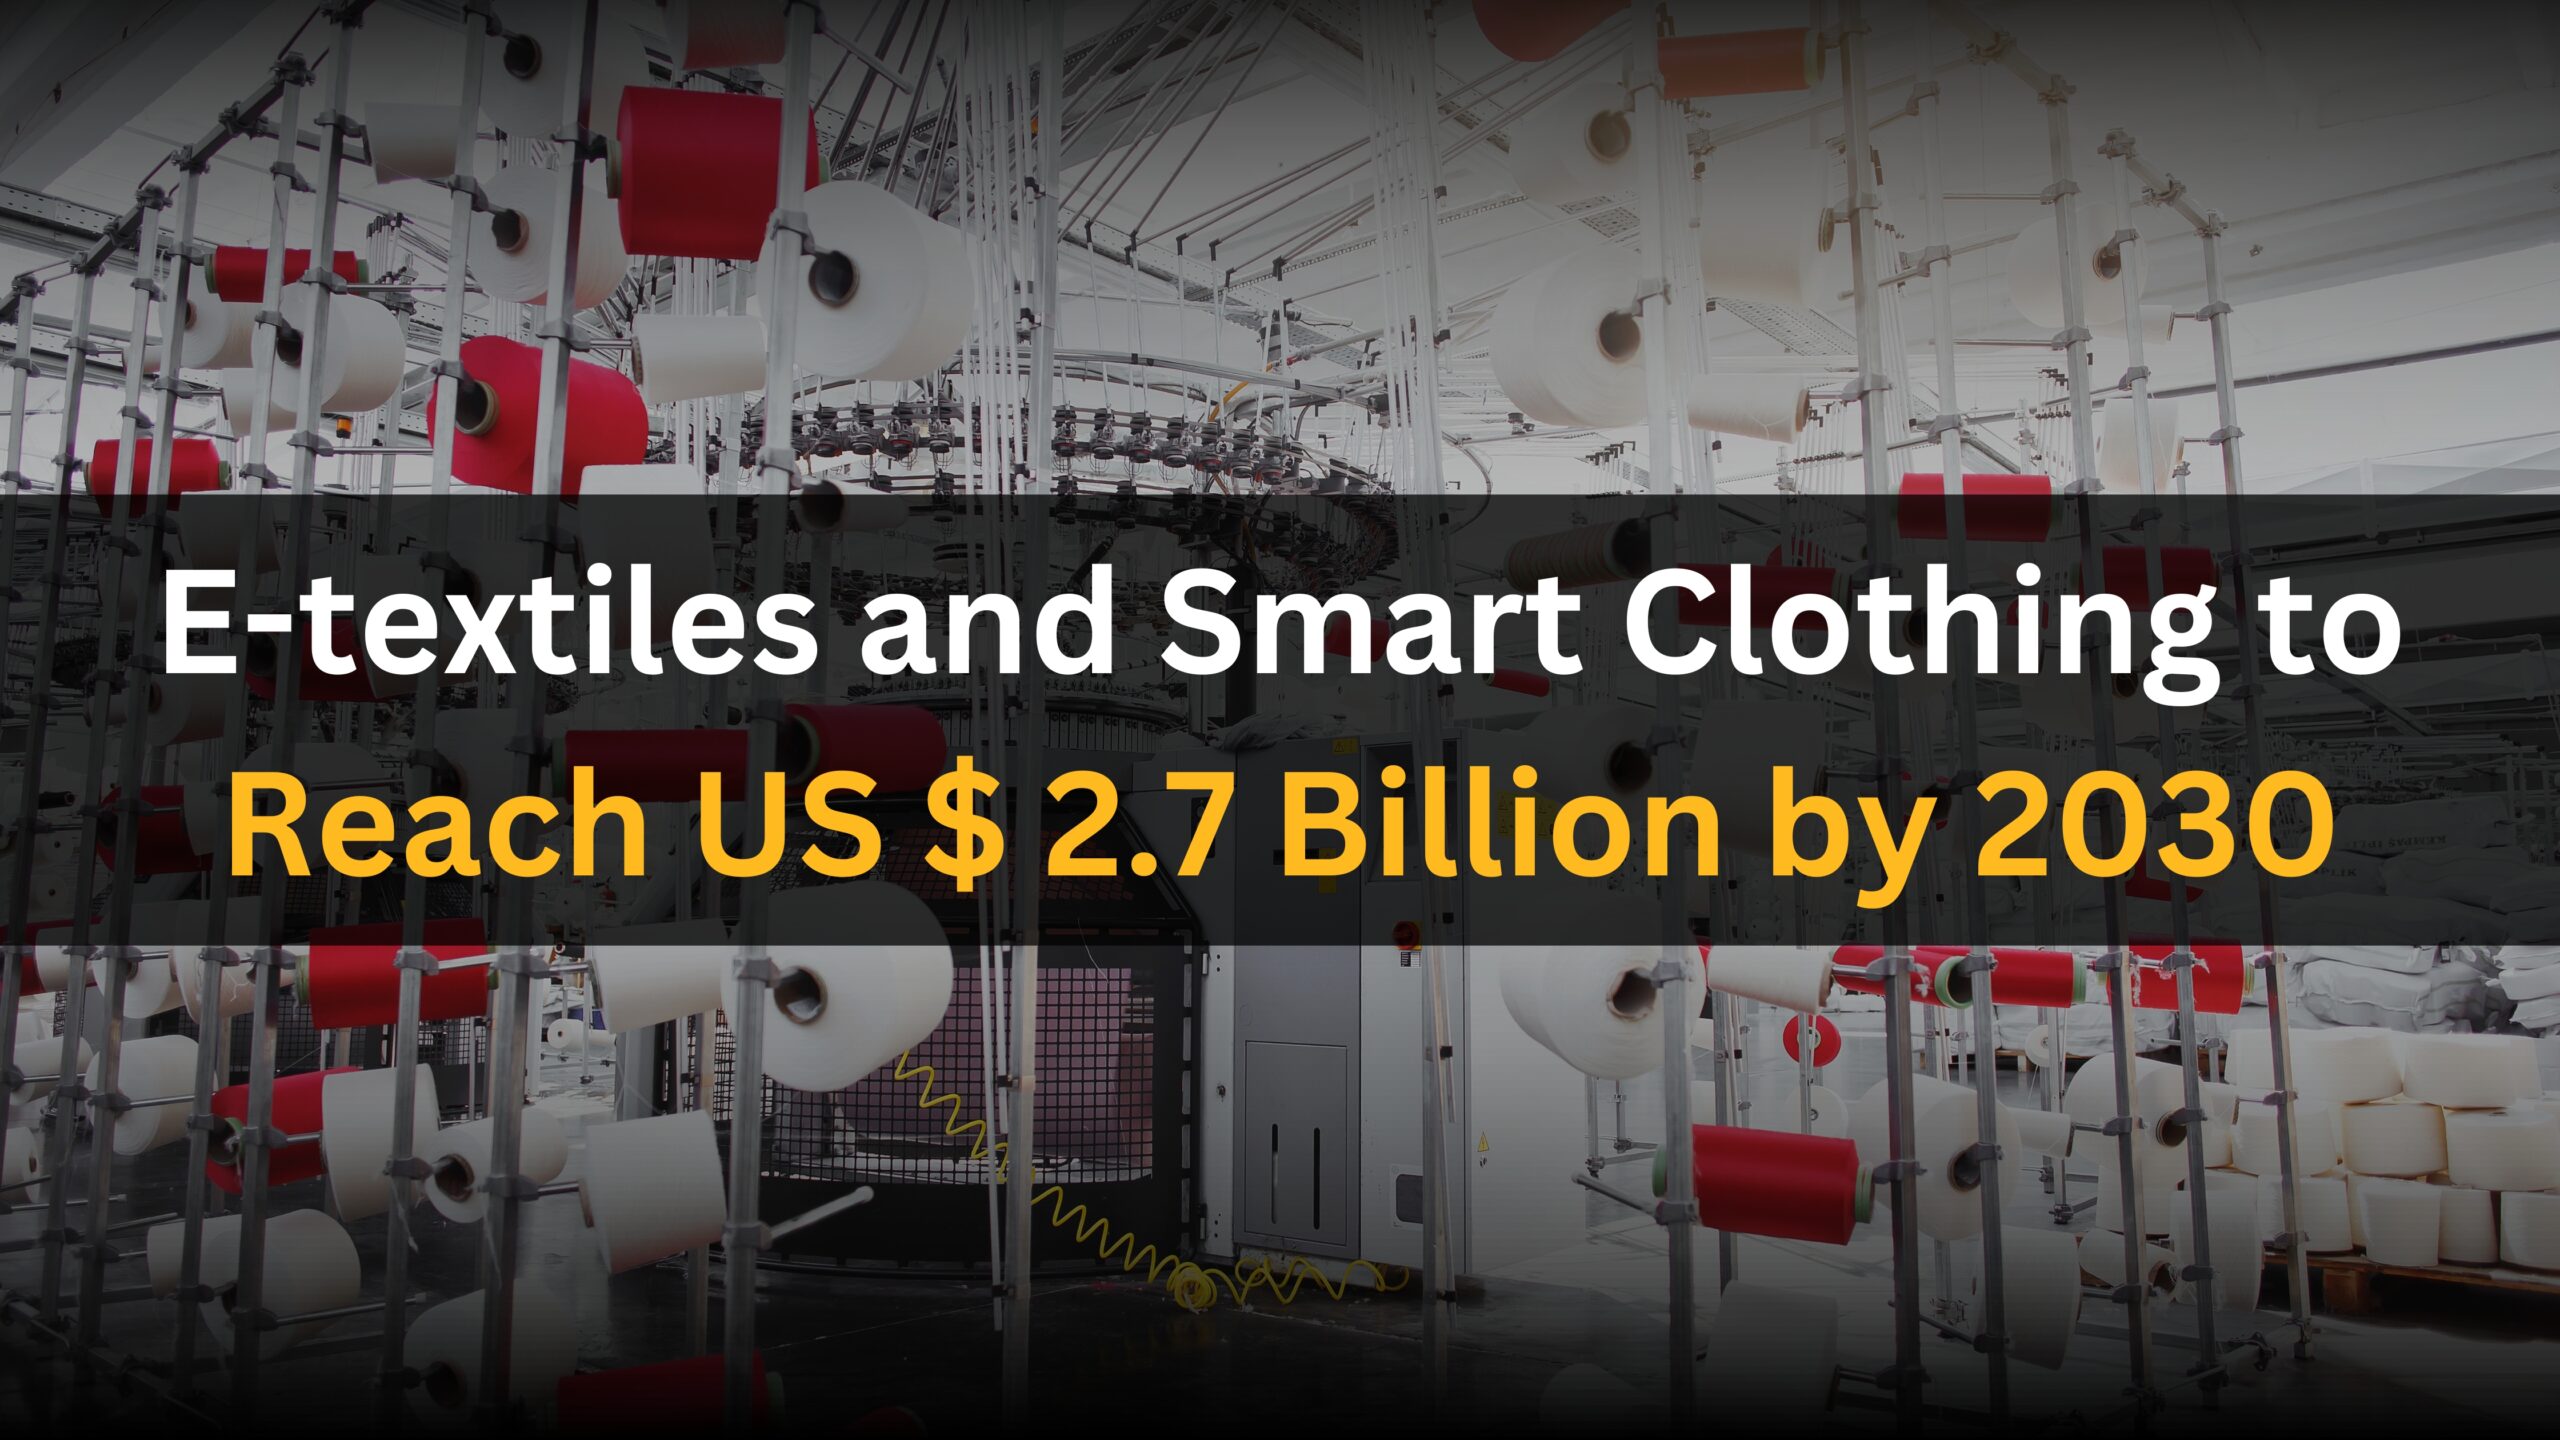 E-textiles and Smart Clothing